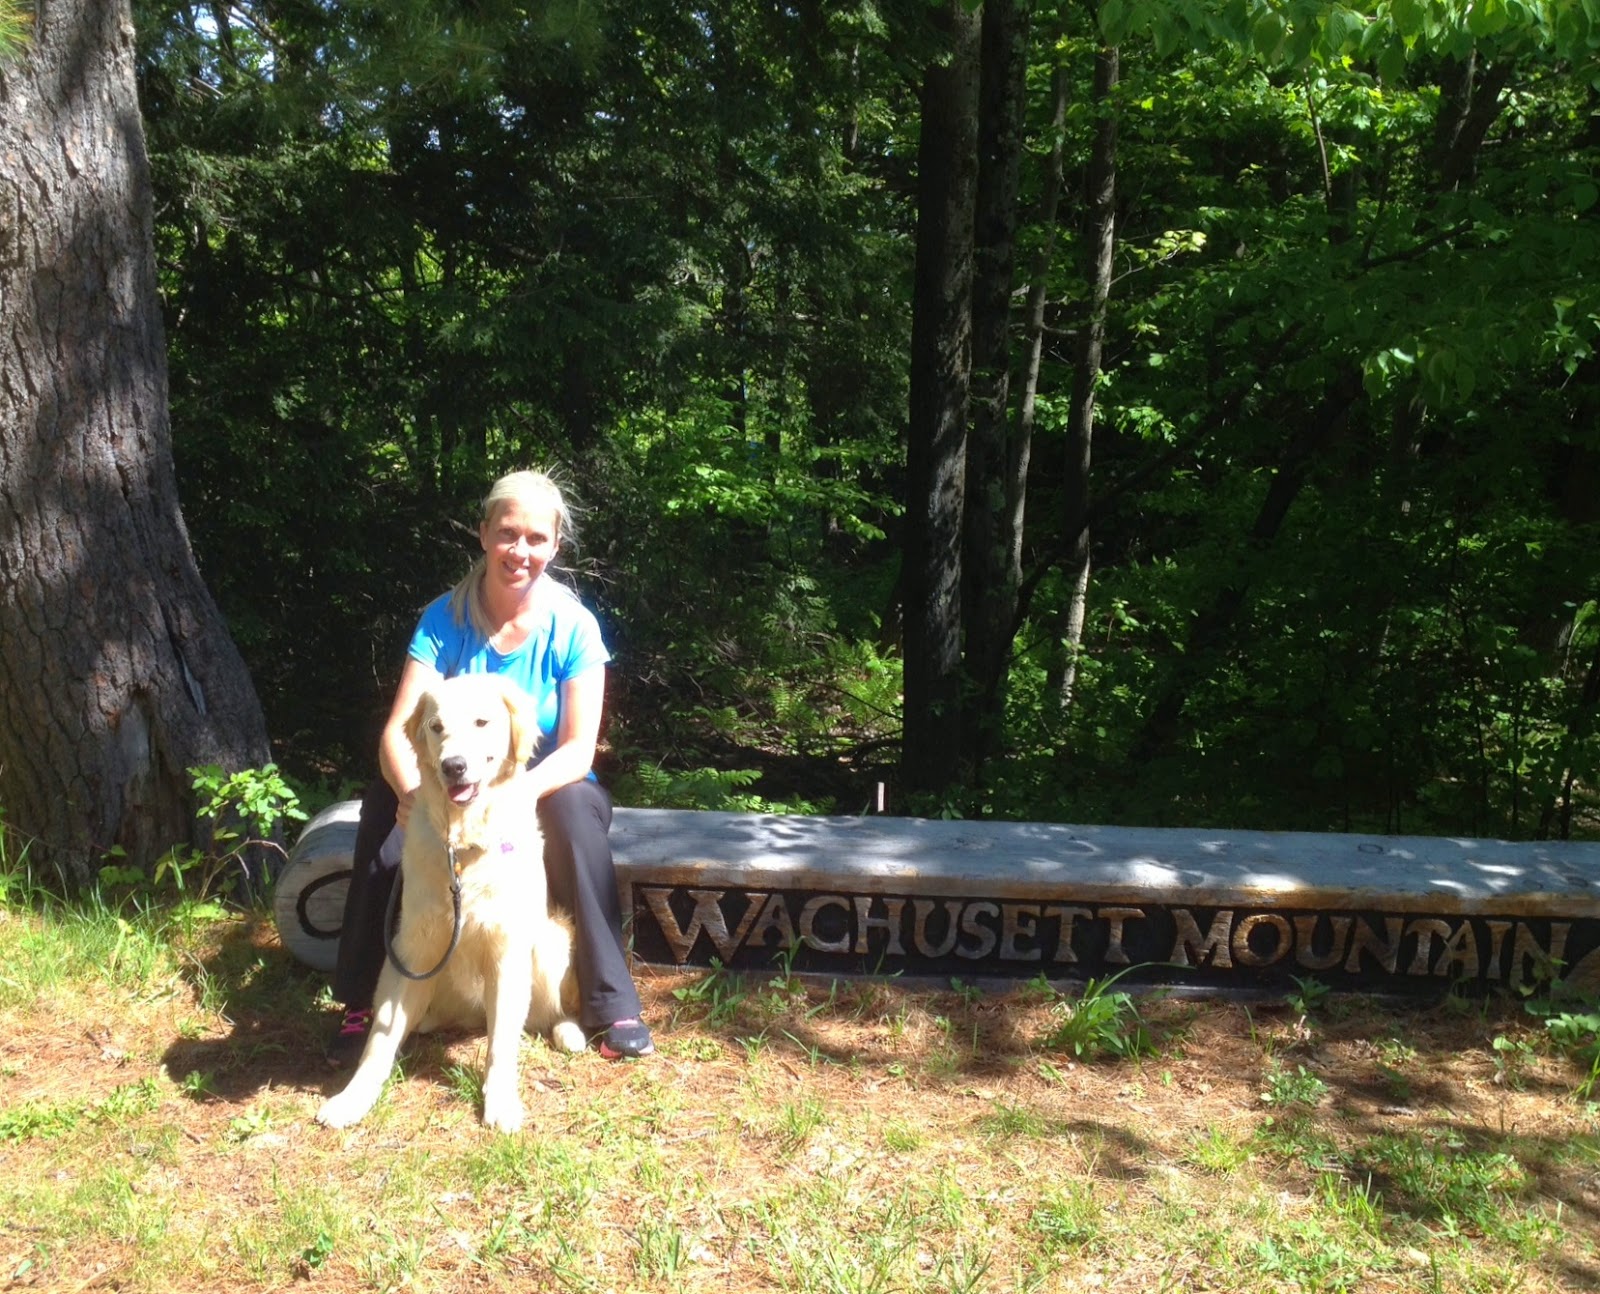 hiking with your dog at wachusett mountain